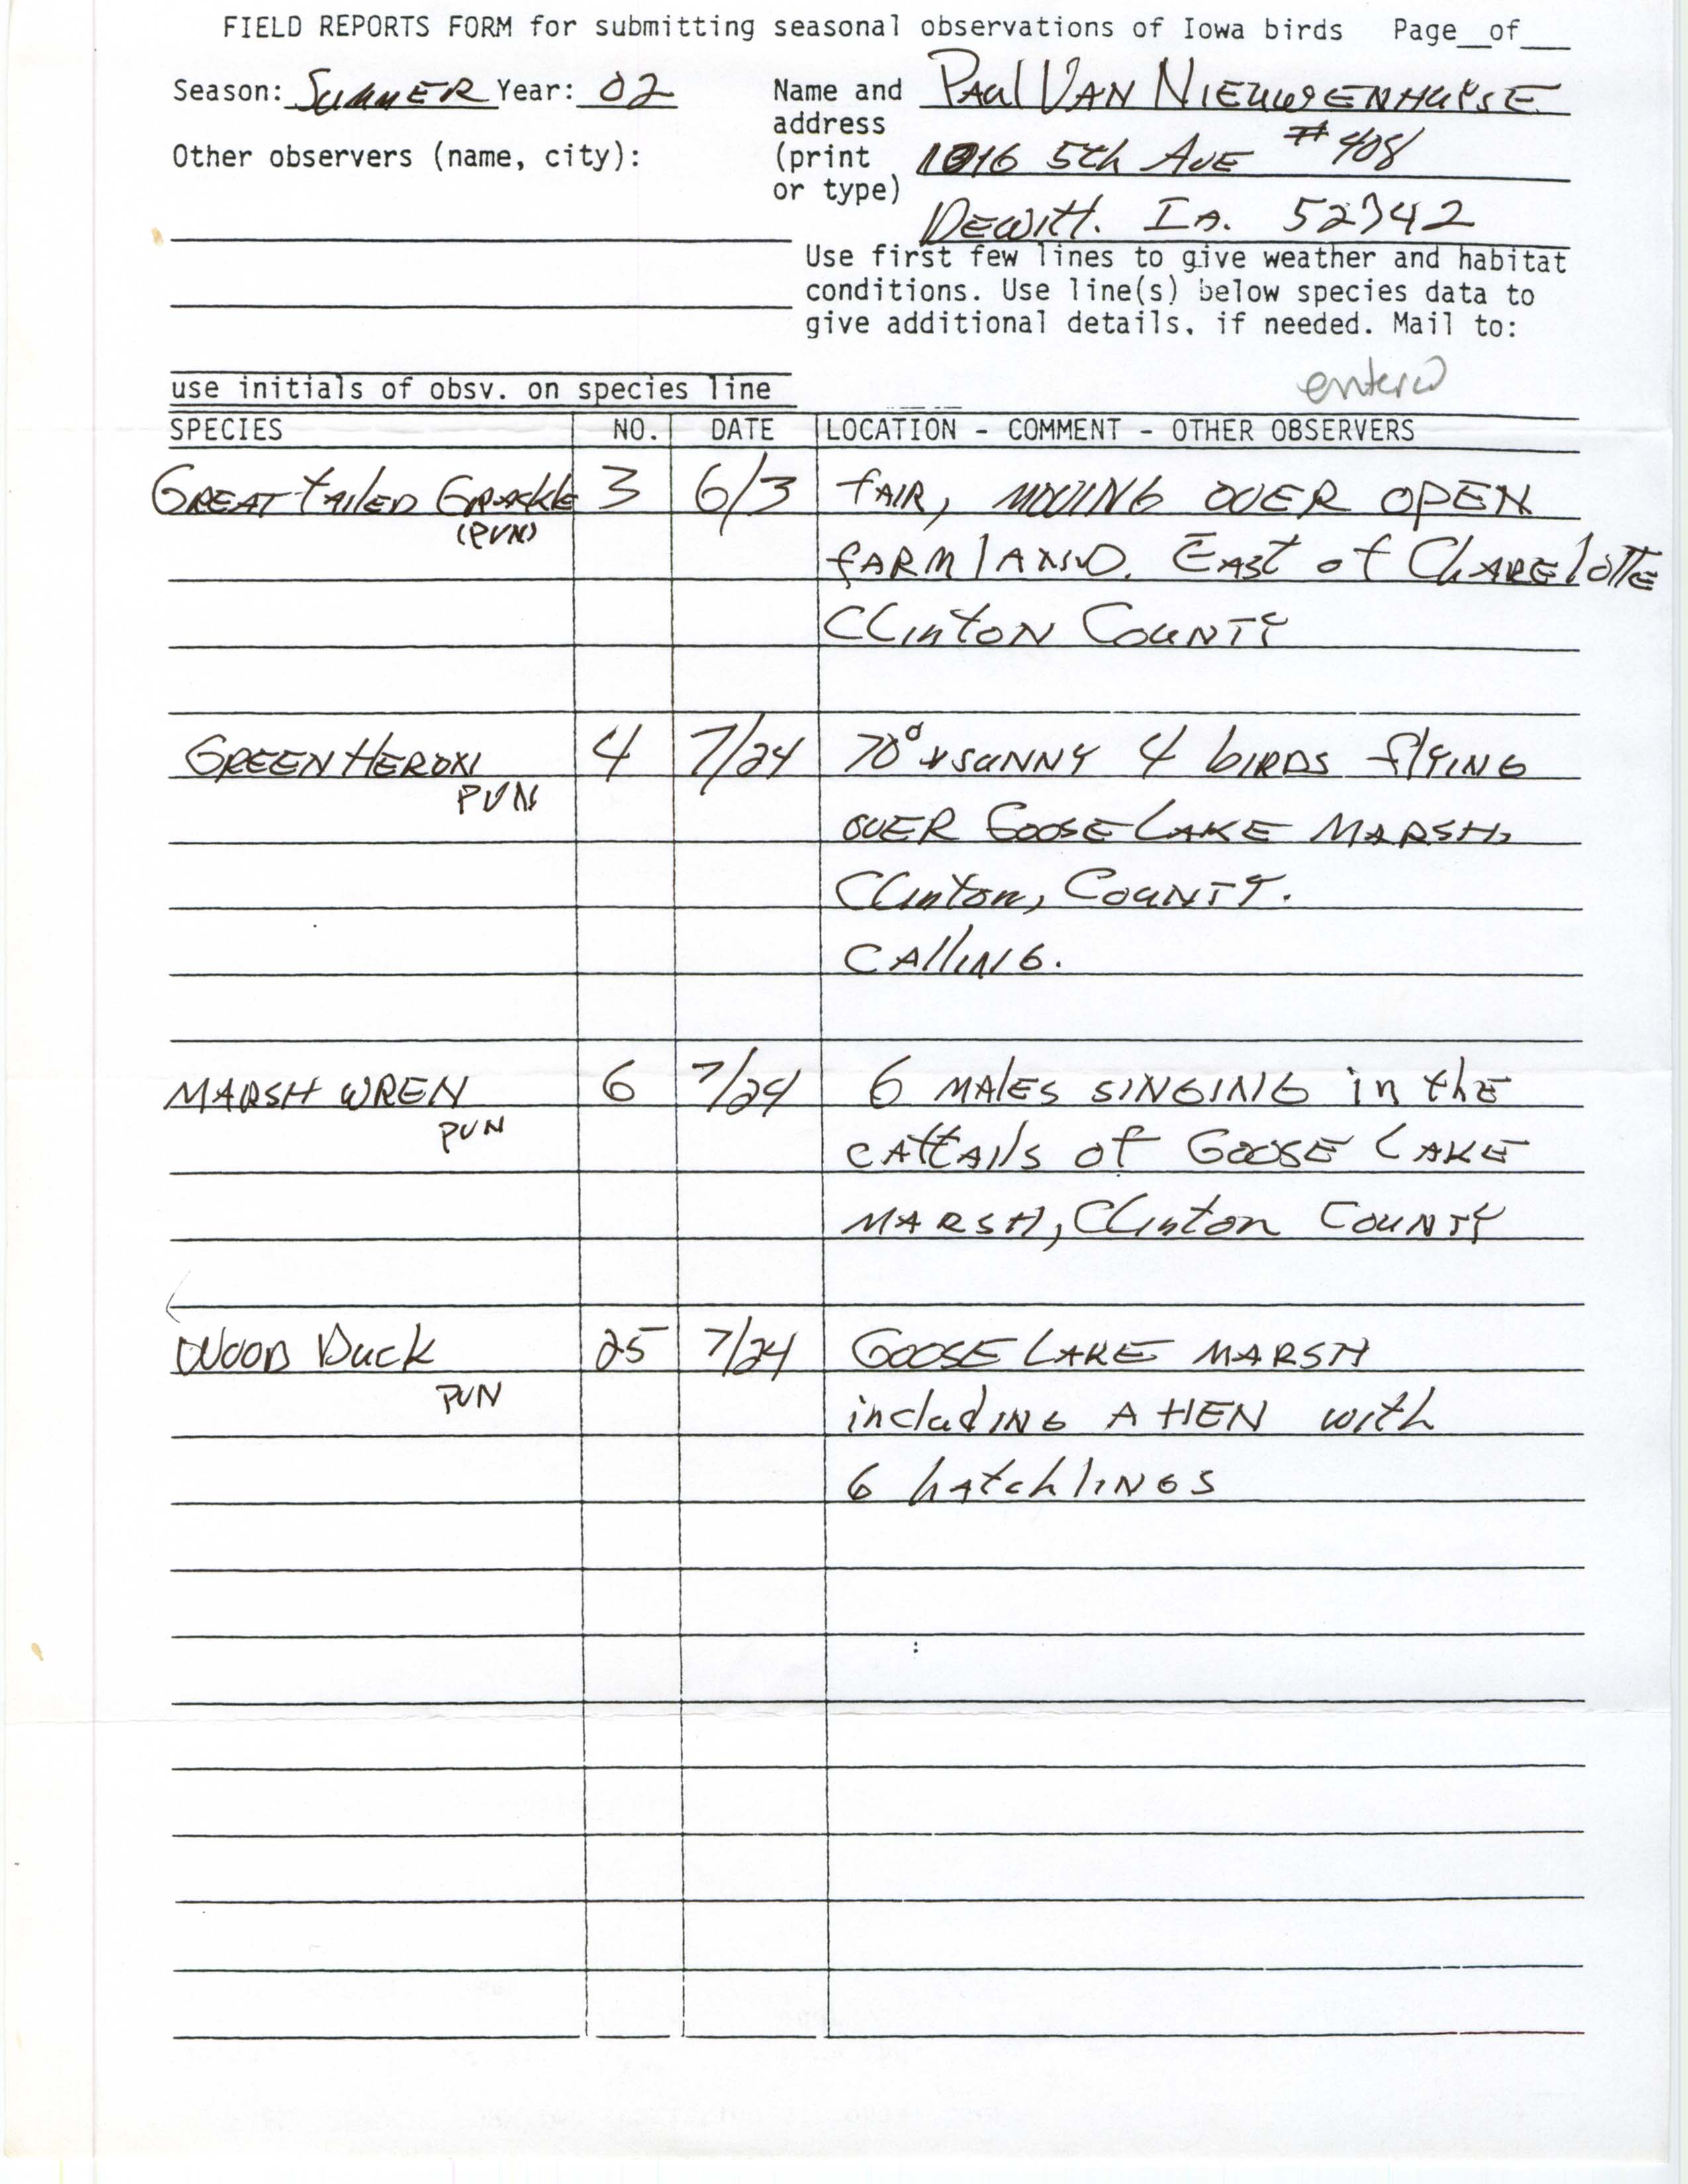 Field reports form for submitting seasonal observations of Iowa birds, Paul Van Nieuwenhuyse, summer 2002